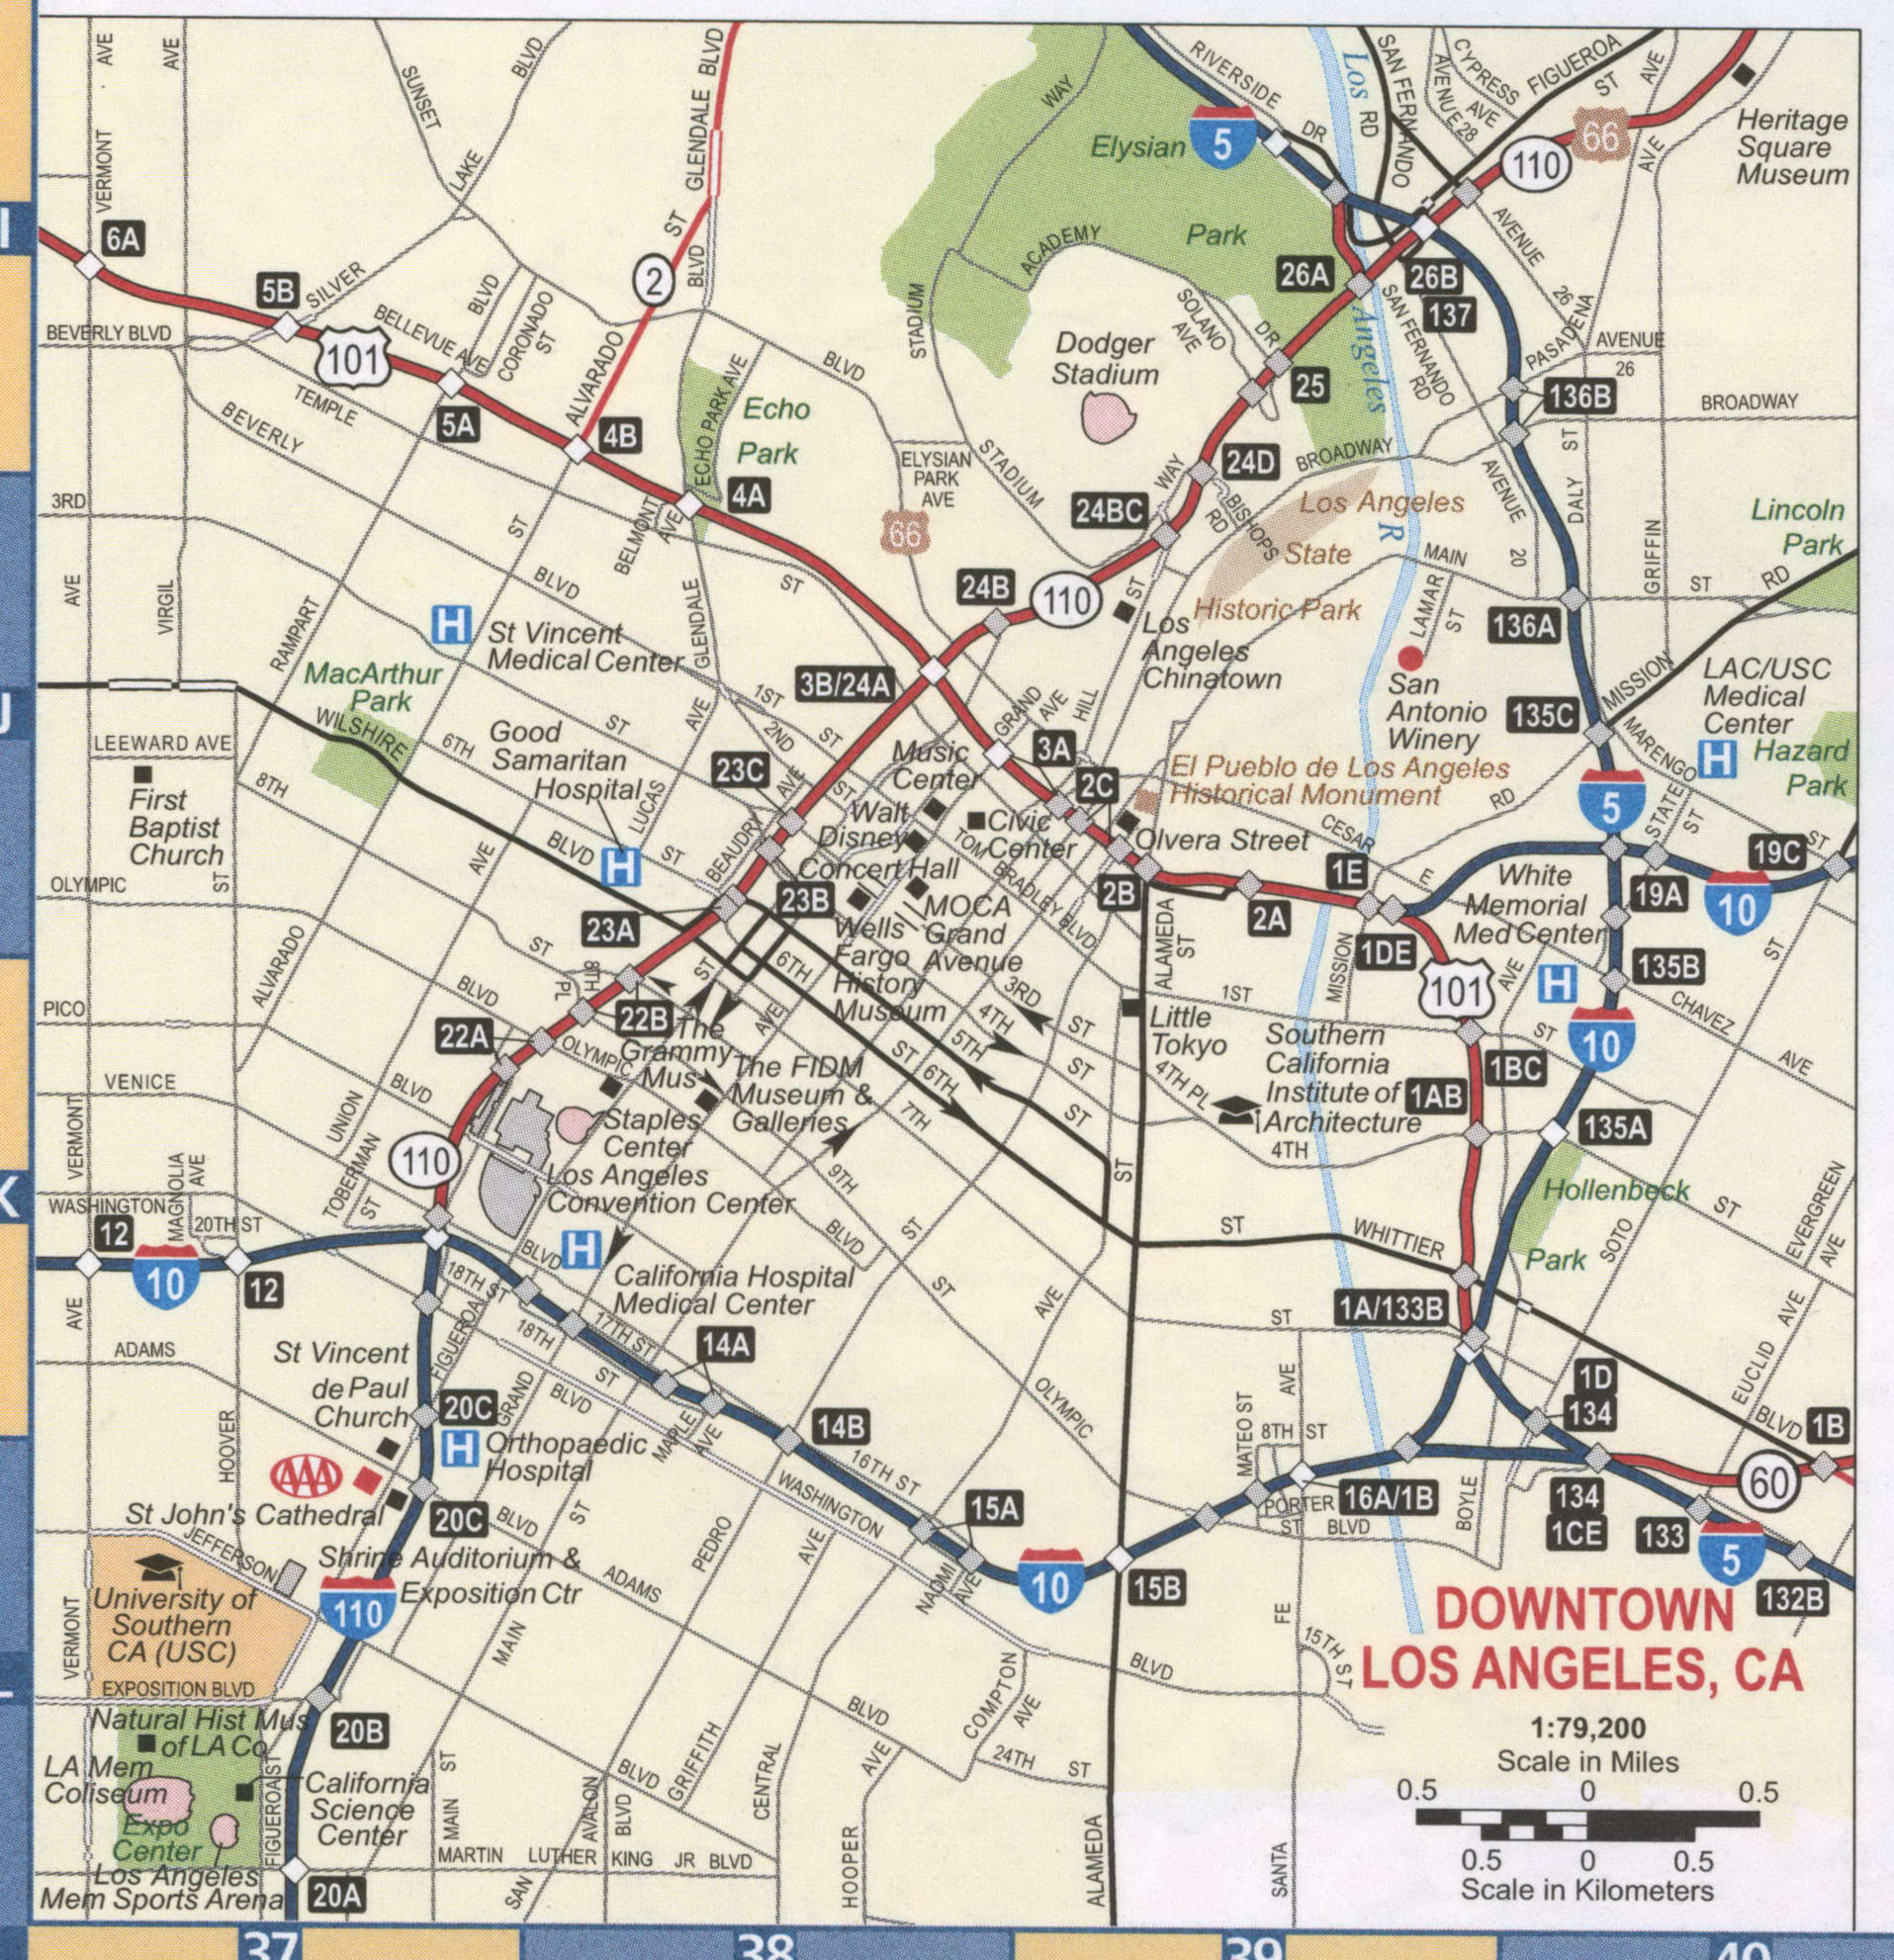 Los Angeles downtown map